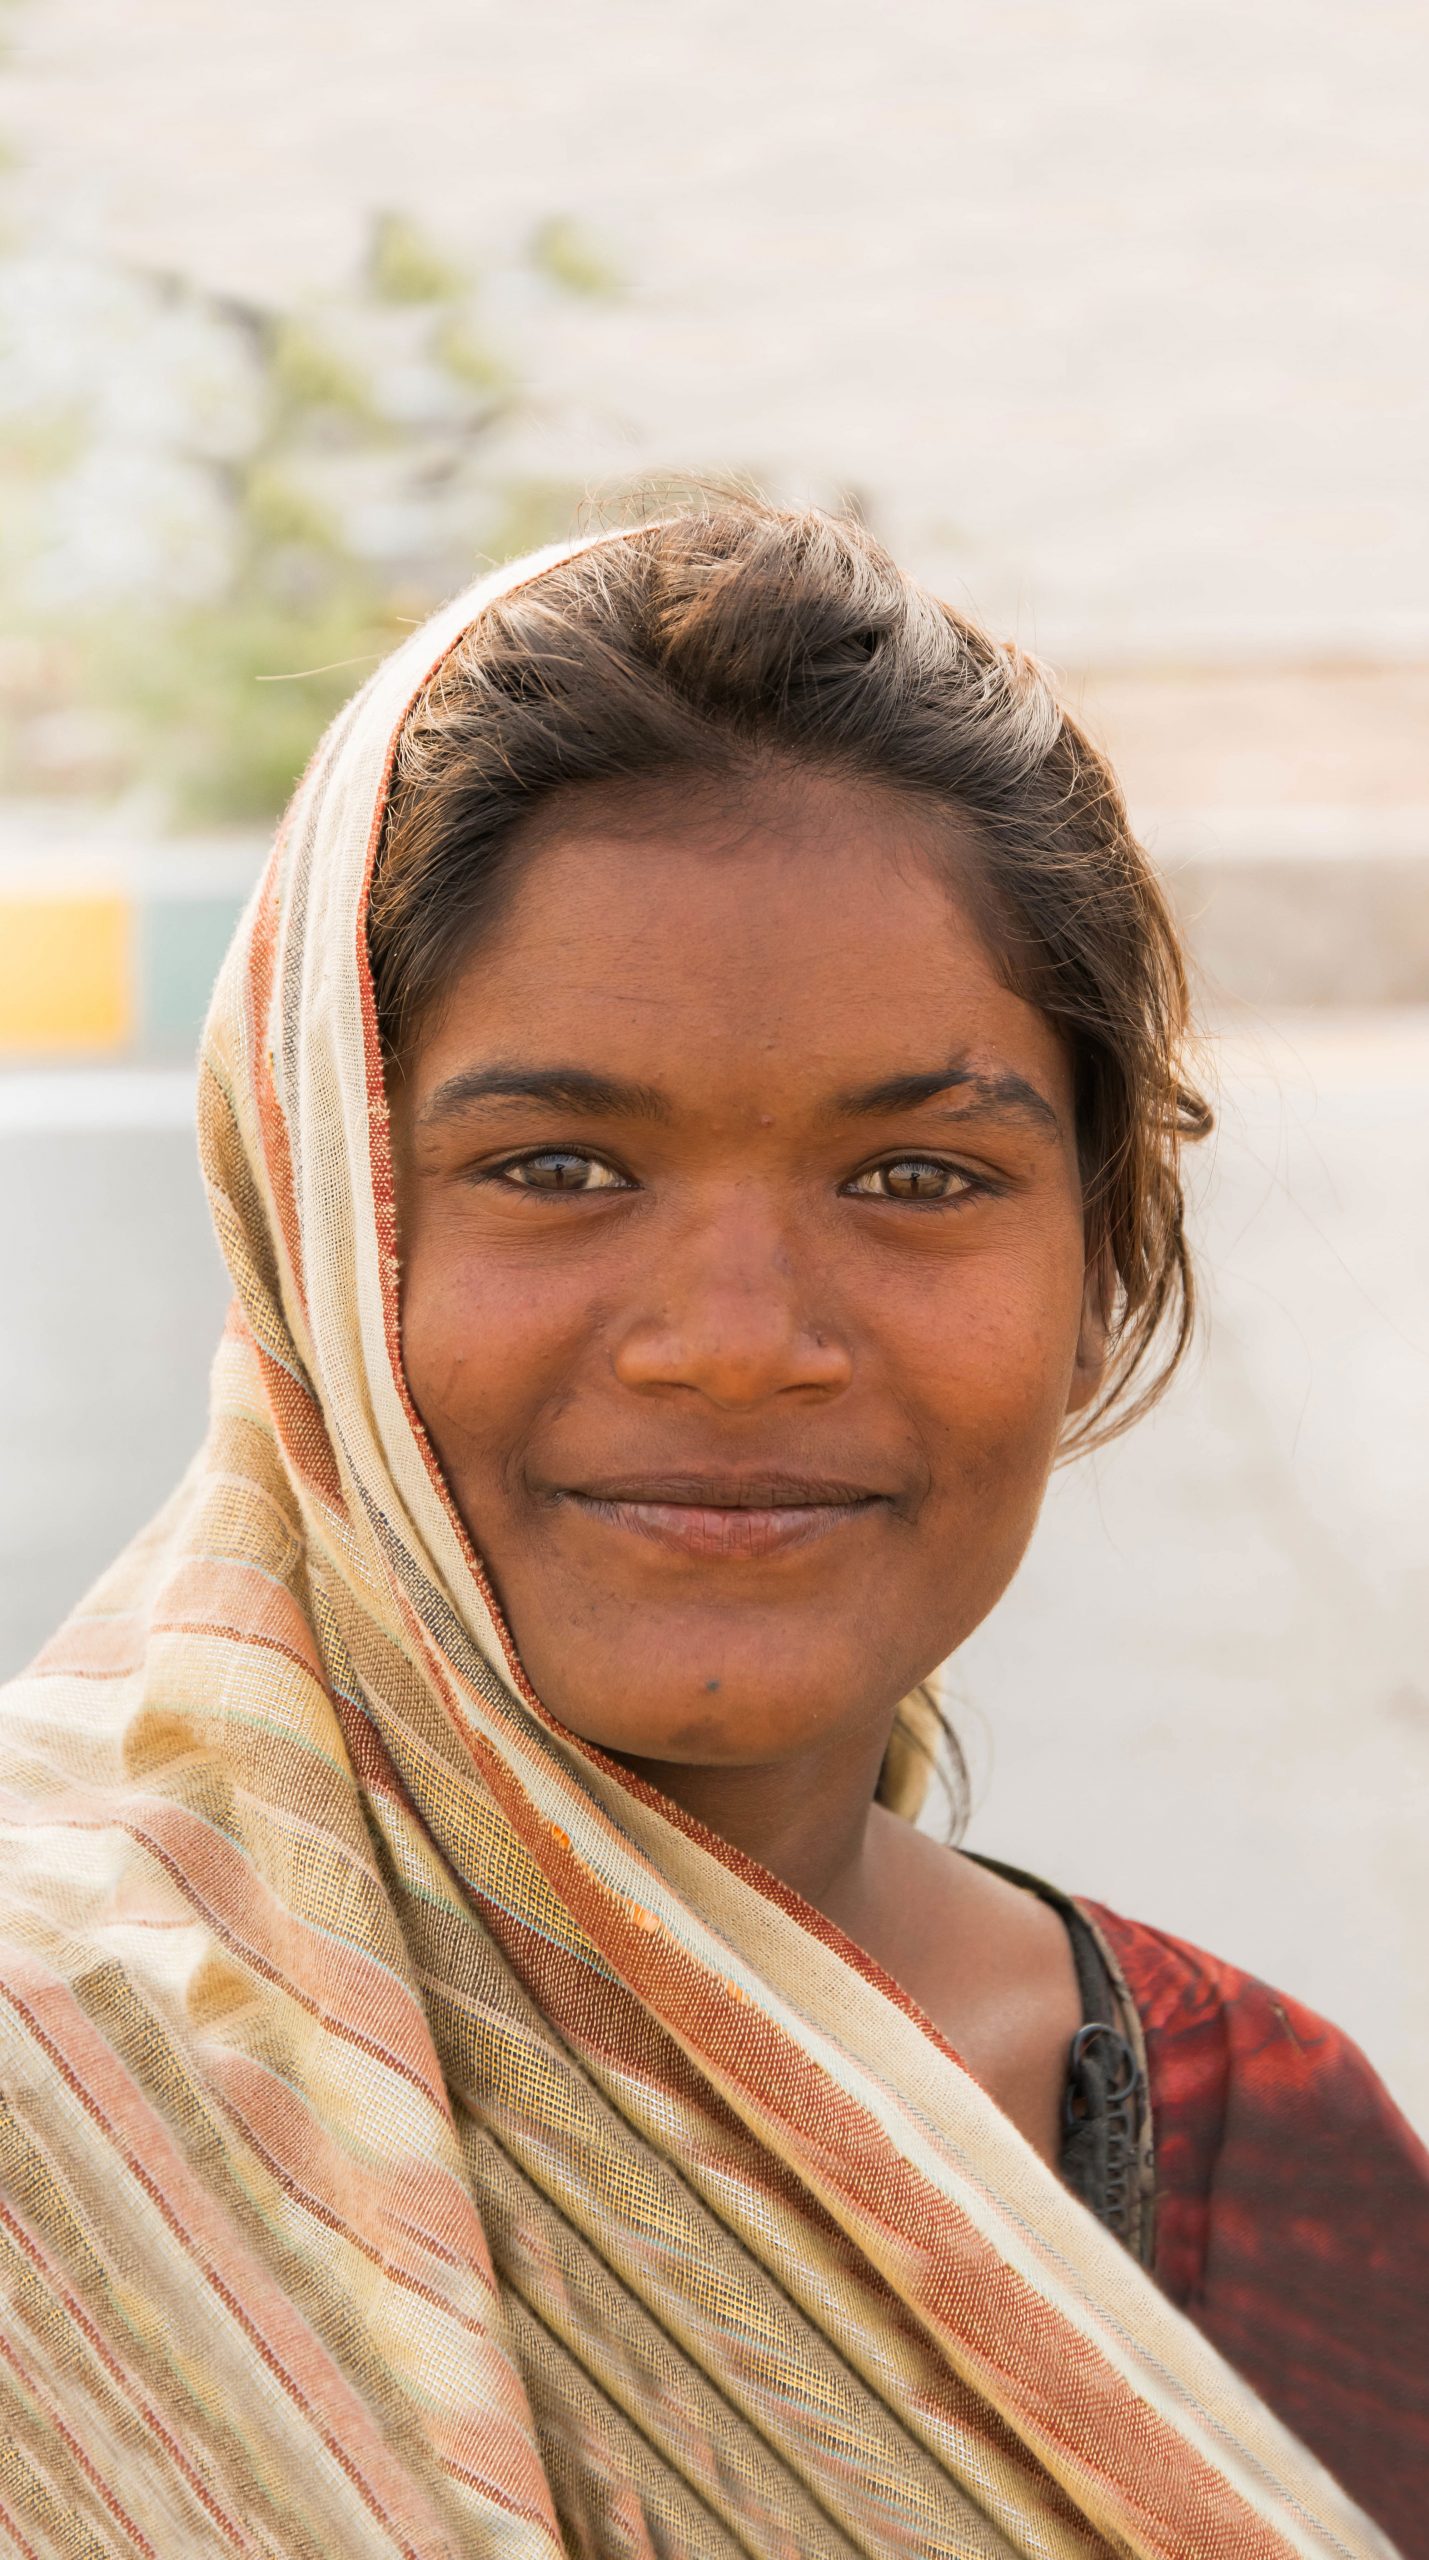 Portrait of a smiling young woman in Ahmedabad India